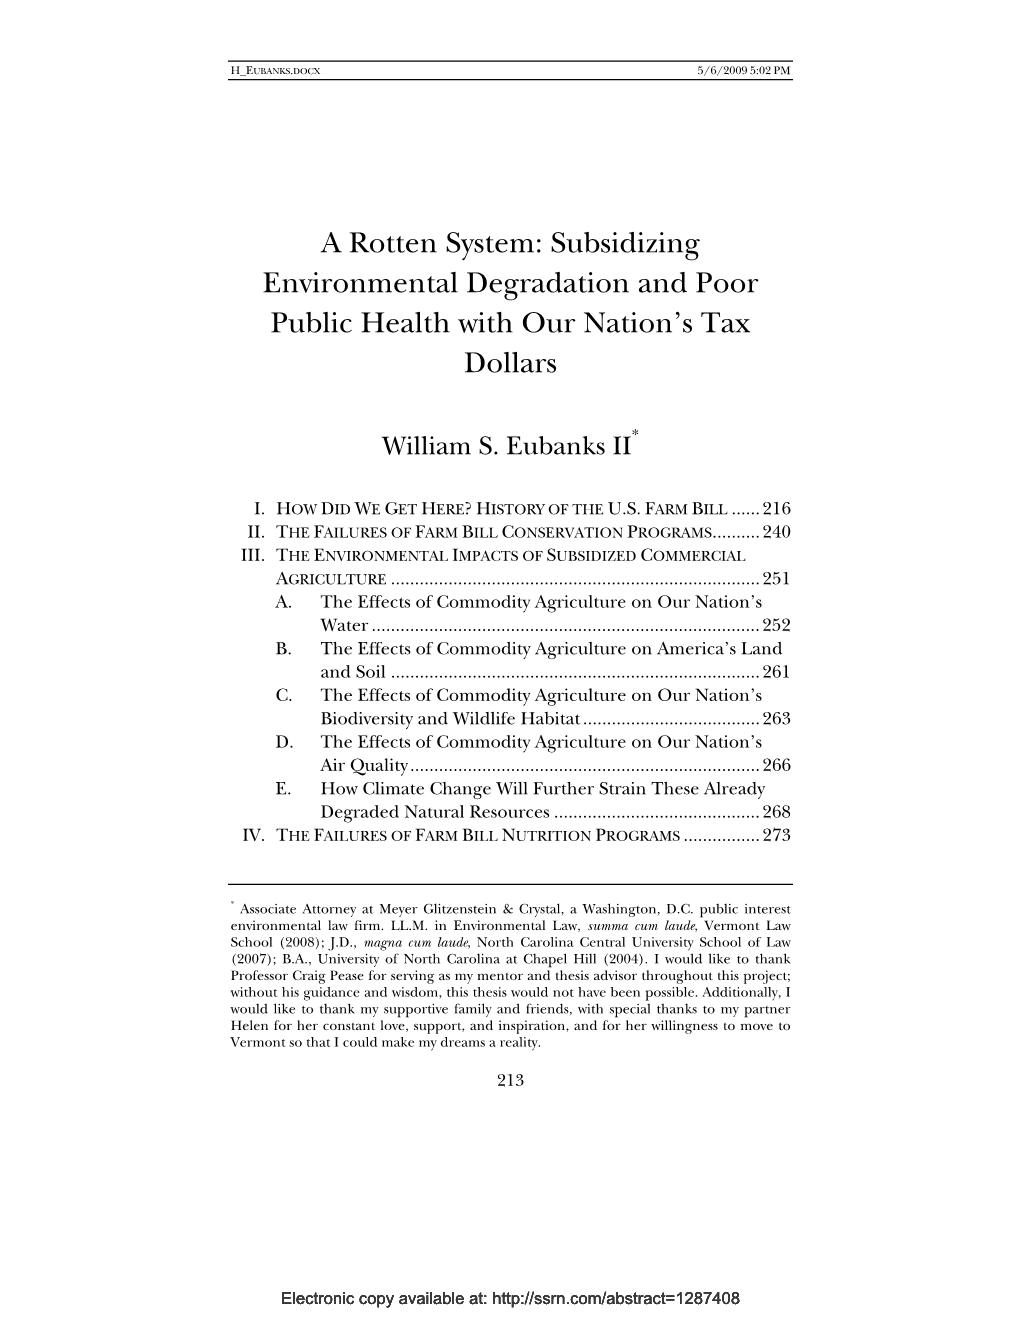 A Rotten System: Subsidizing Environmental Degradation and Poor Public Health with Our Nation’S Tax Dollars